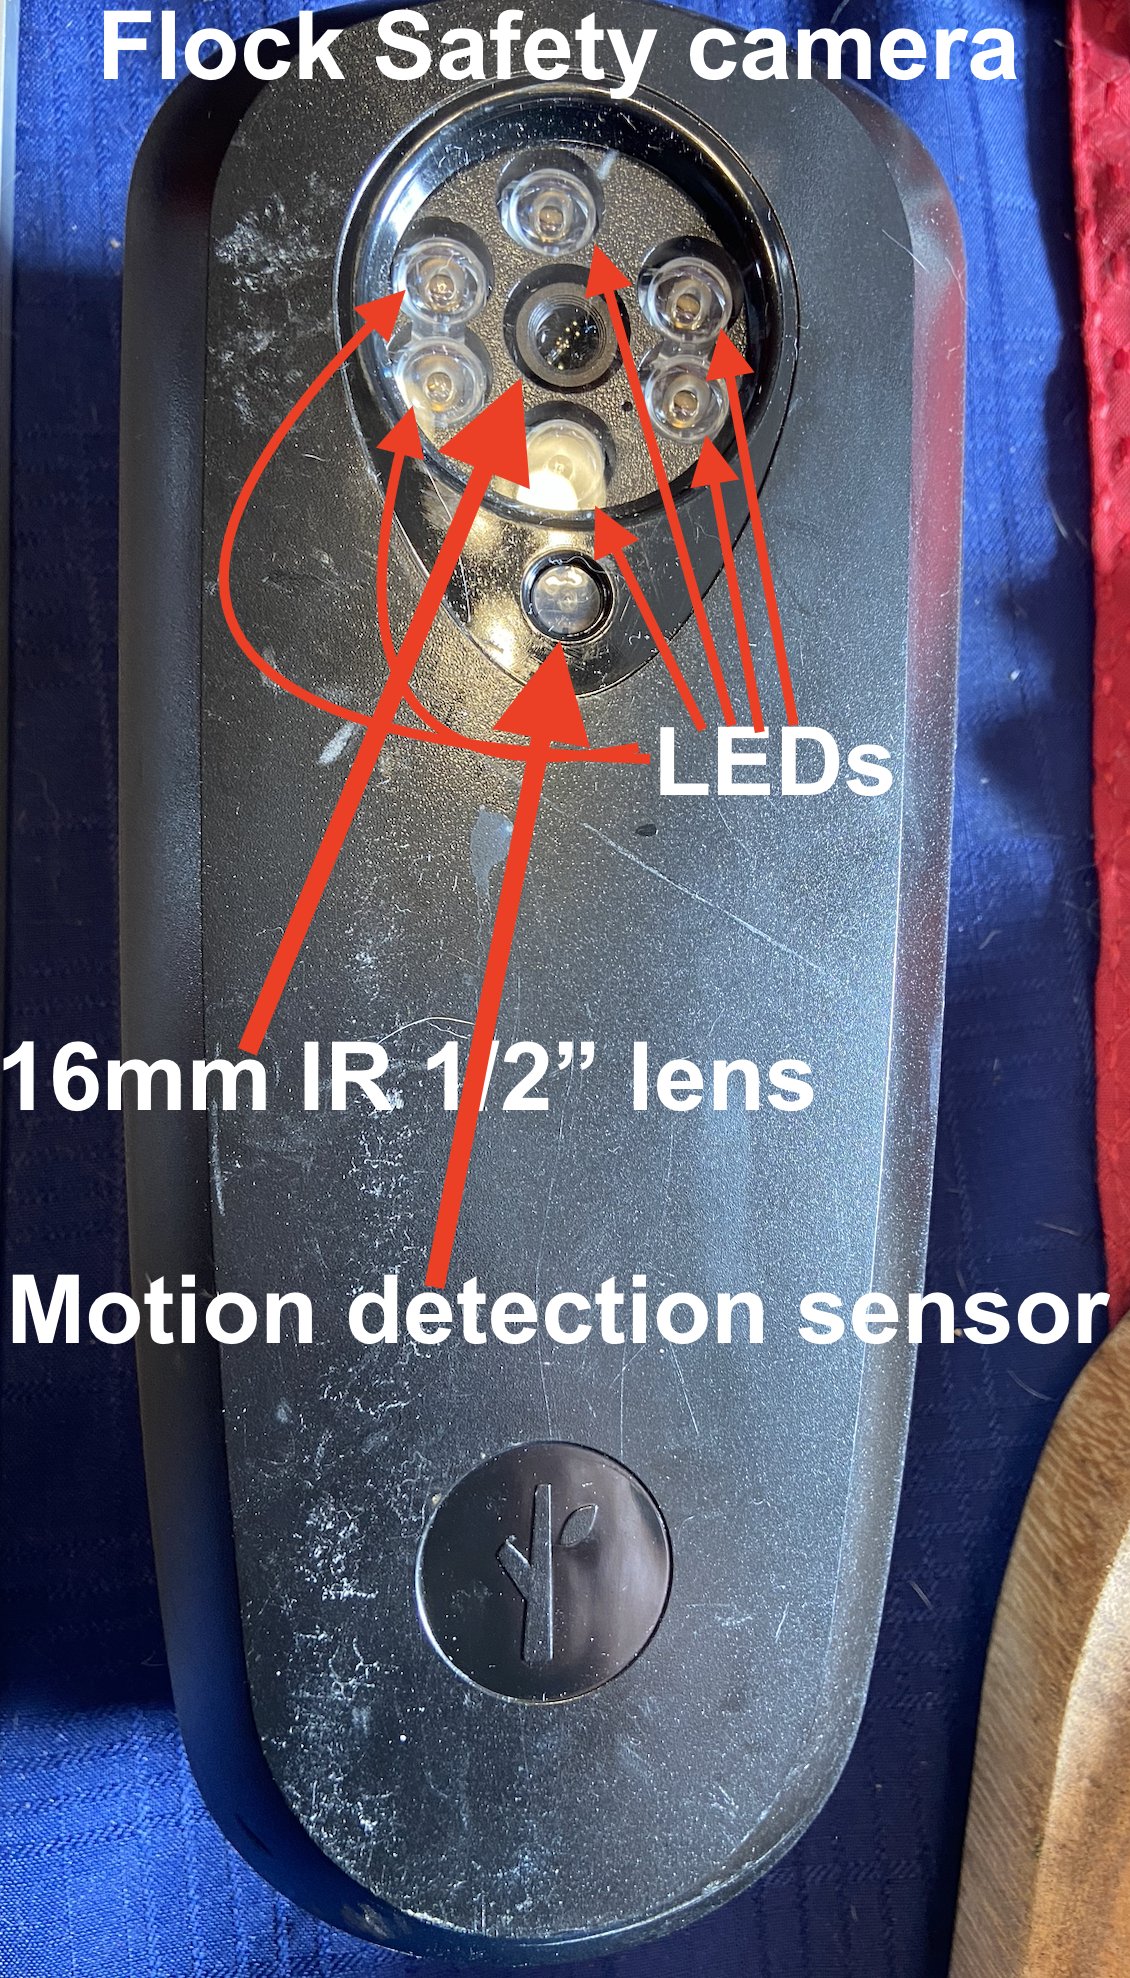 Annotated view of the front of Flock Safety camera showing motion detection sensor, camera, and LEDs